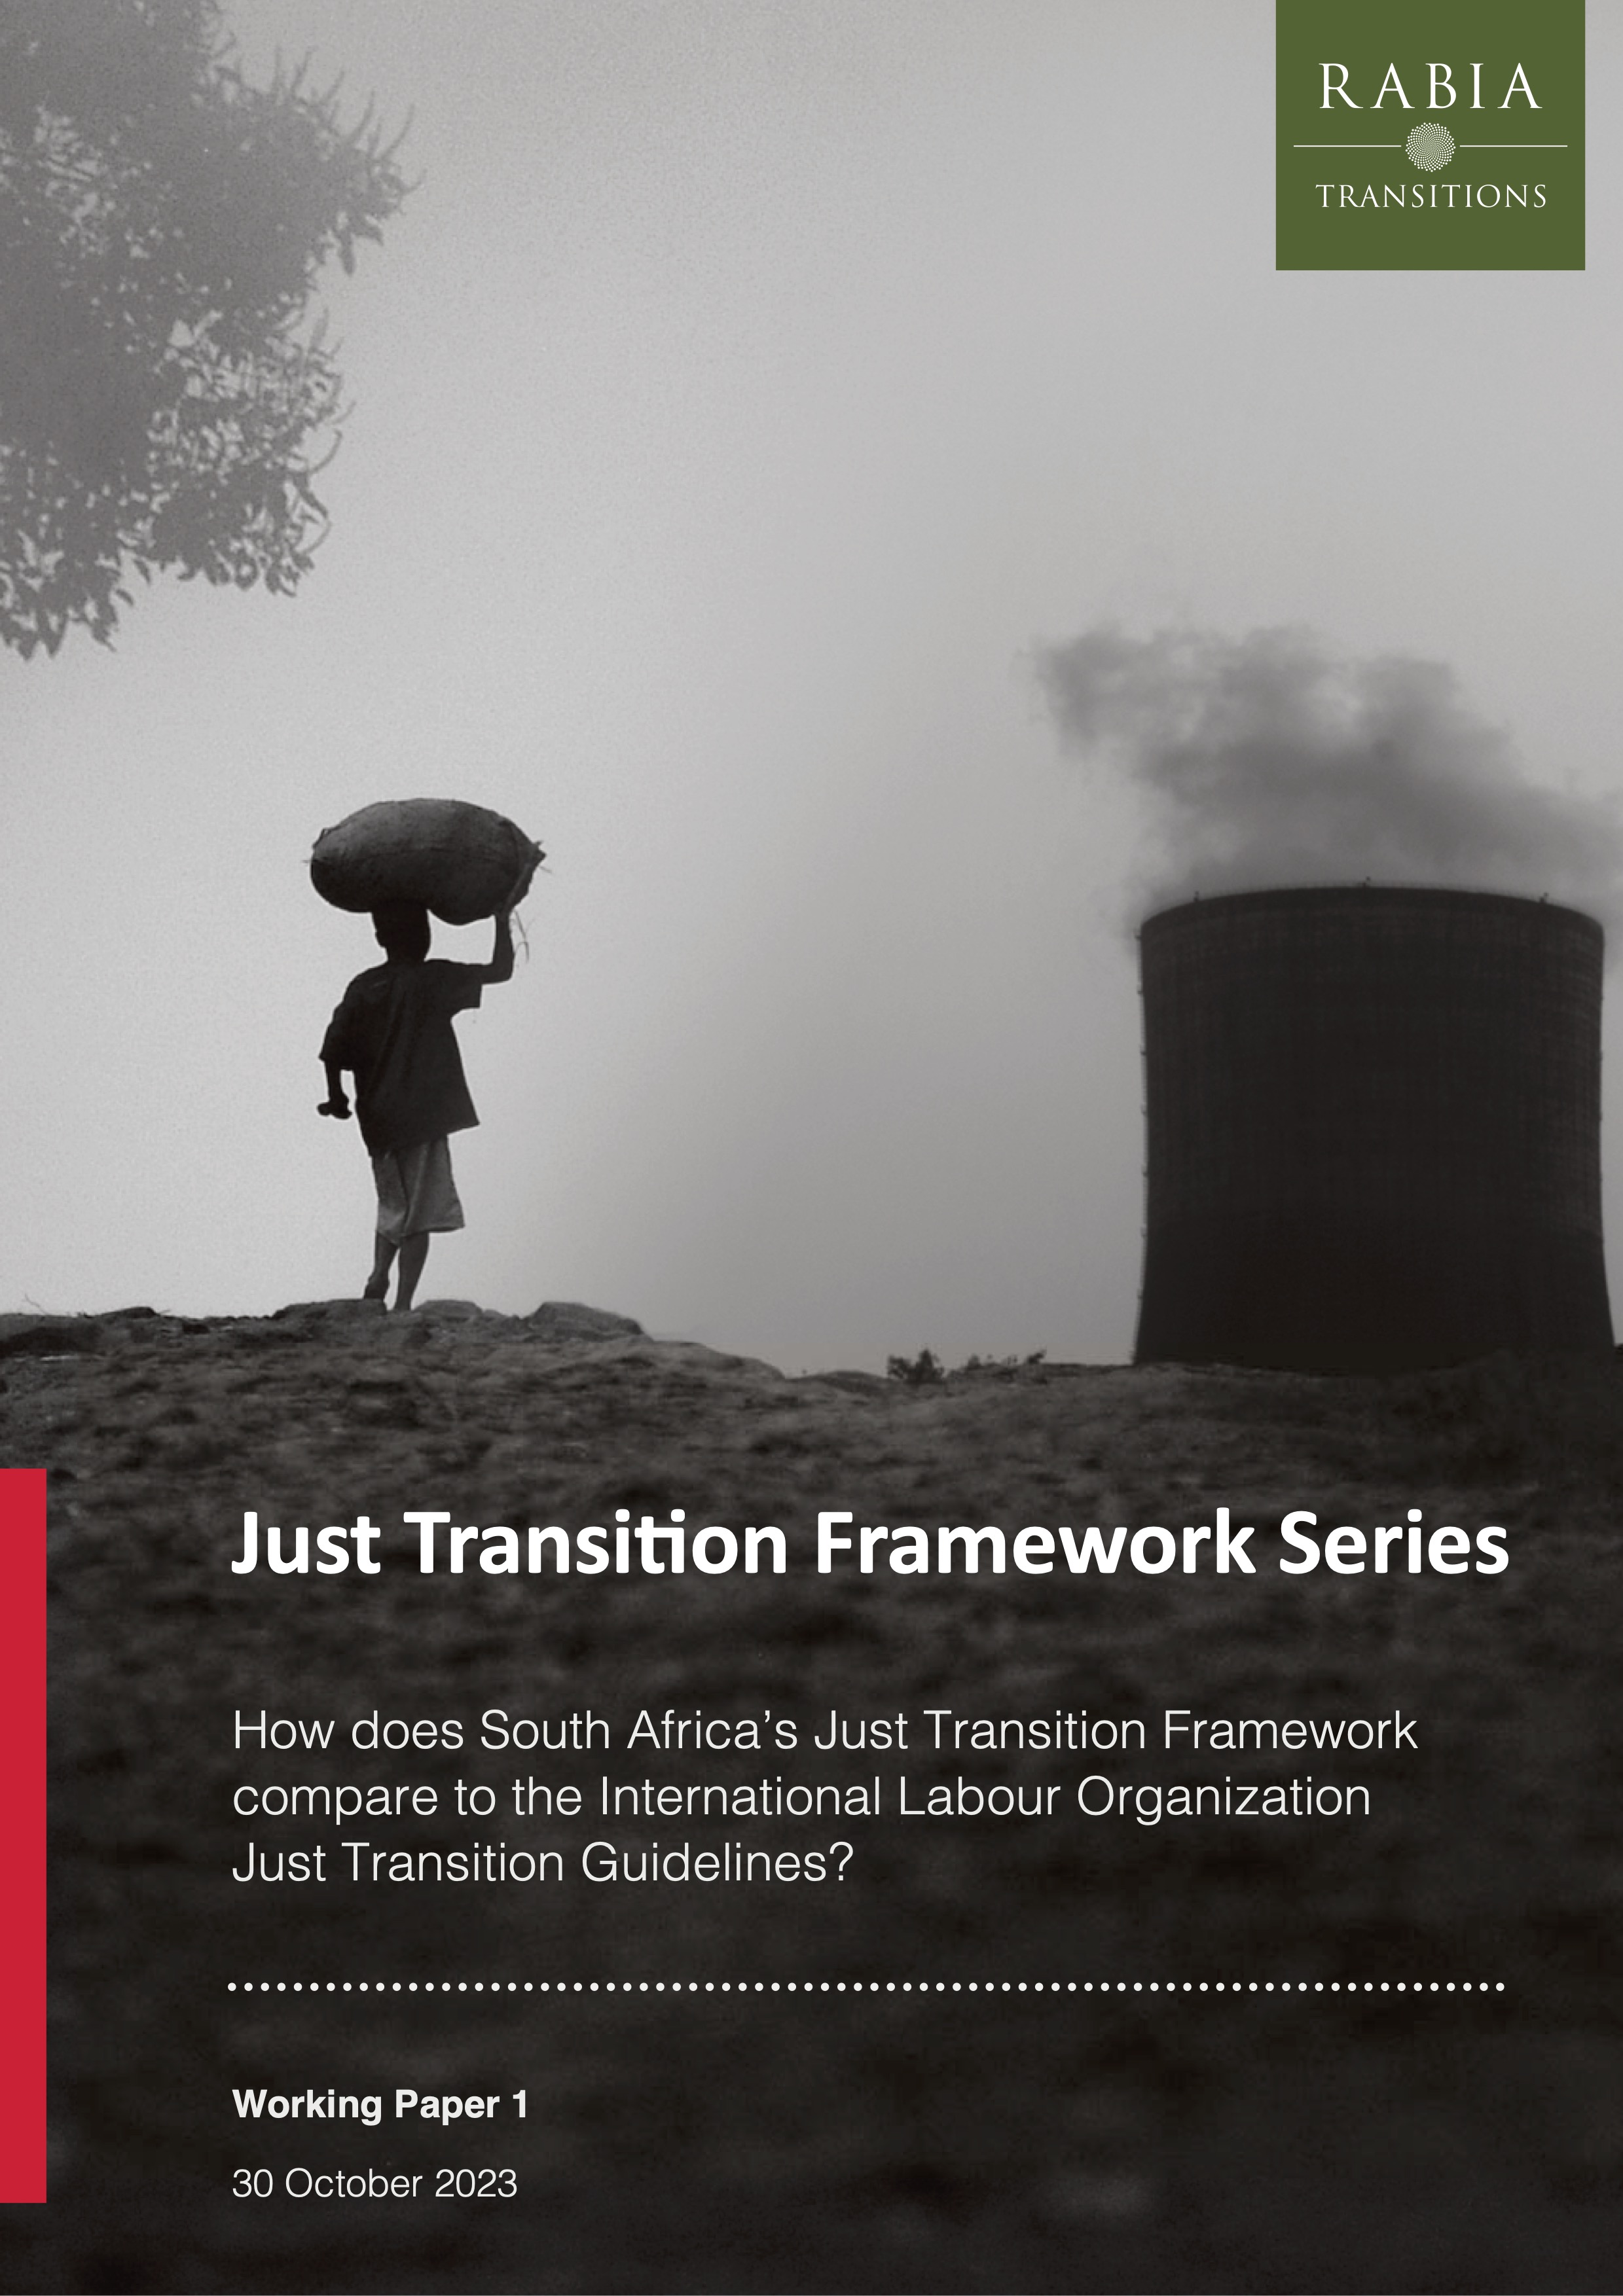 How does South Africa’s Just Transition Framework compare to the International Labour Organization Just Transition Guidelines?